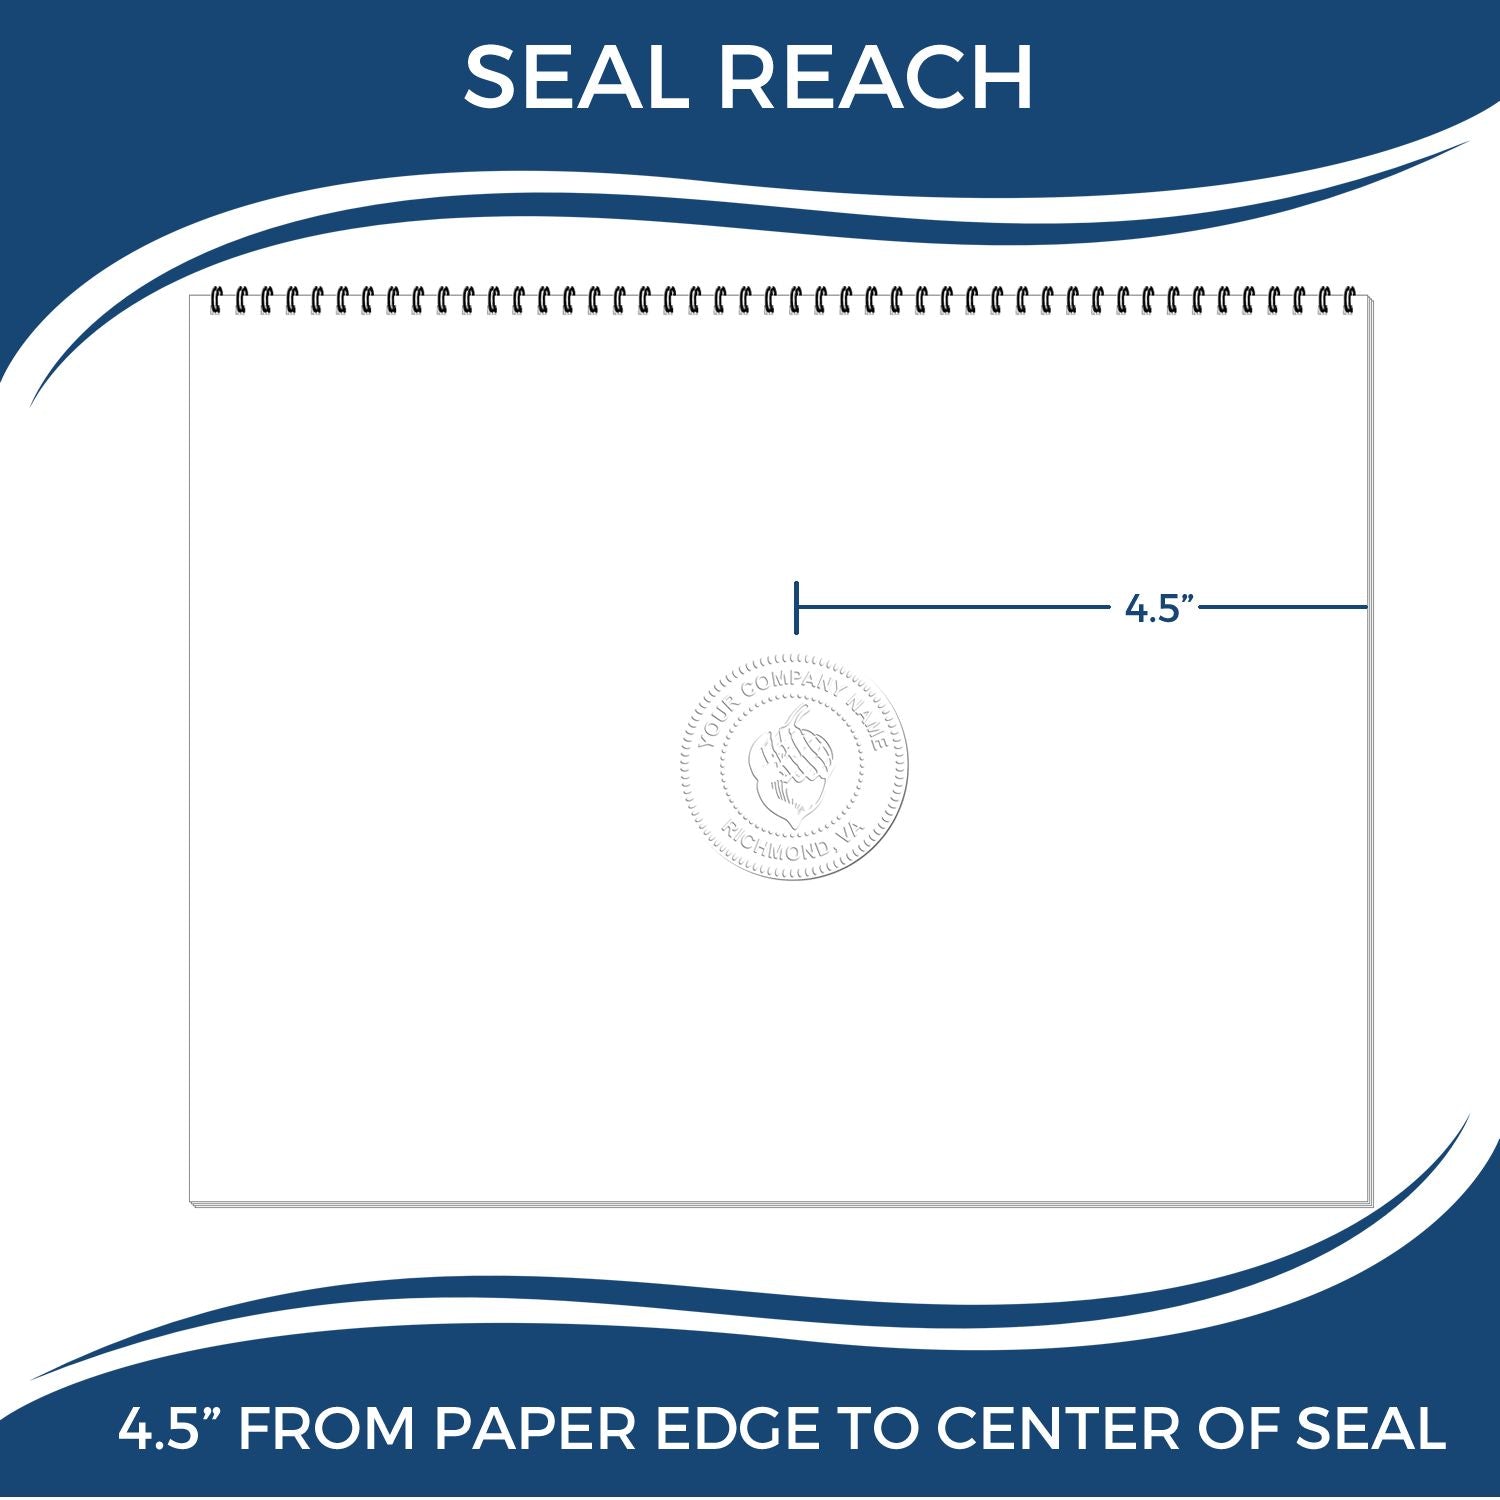 An infographic showing the seal reach which is represented by a ruler and a miniature seal image of the State of Colorado Extended Long Reach Geologist Seal